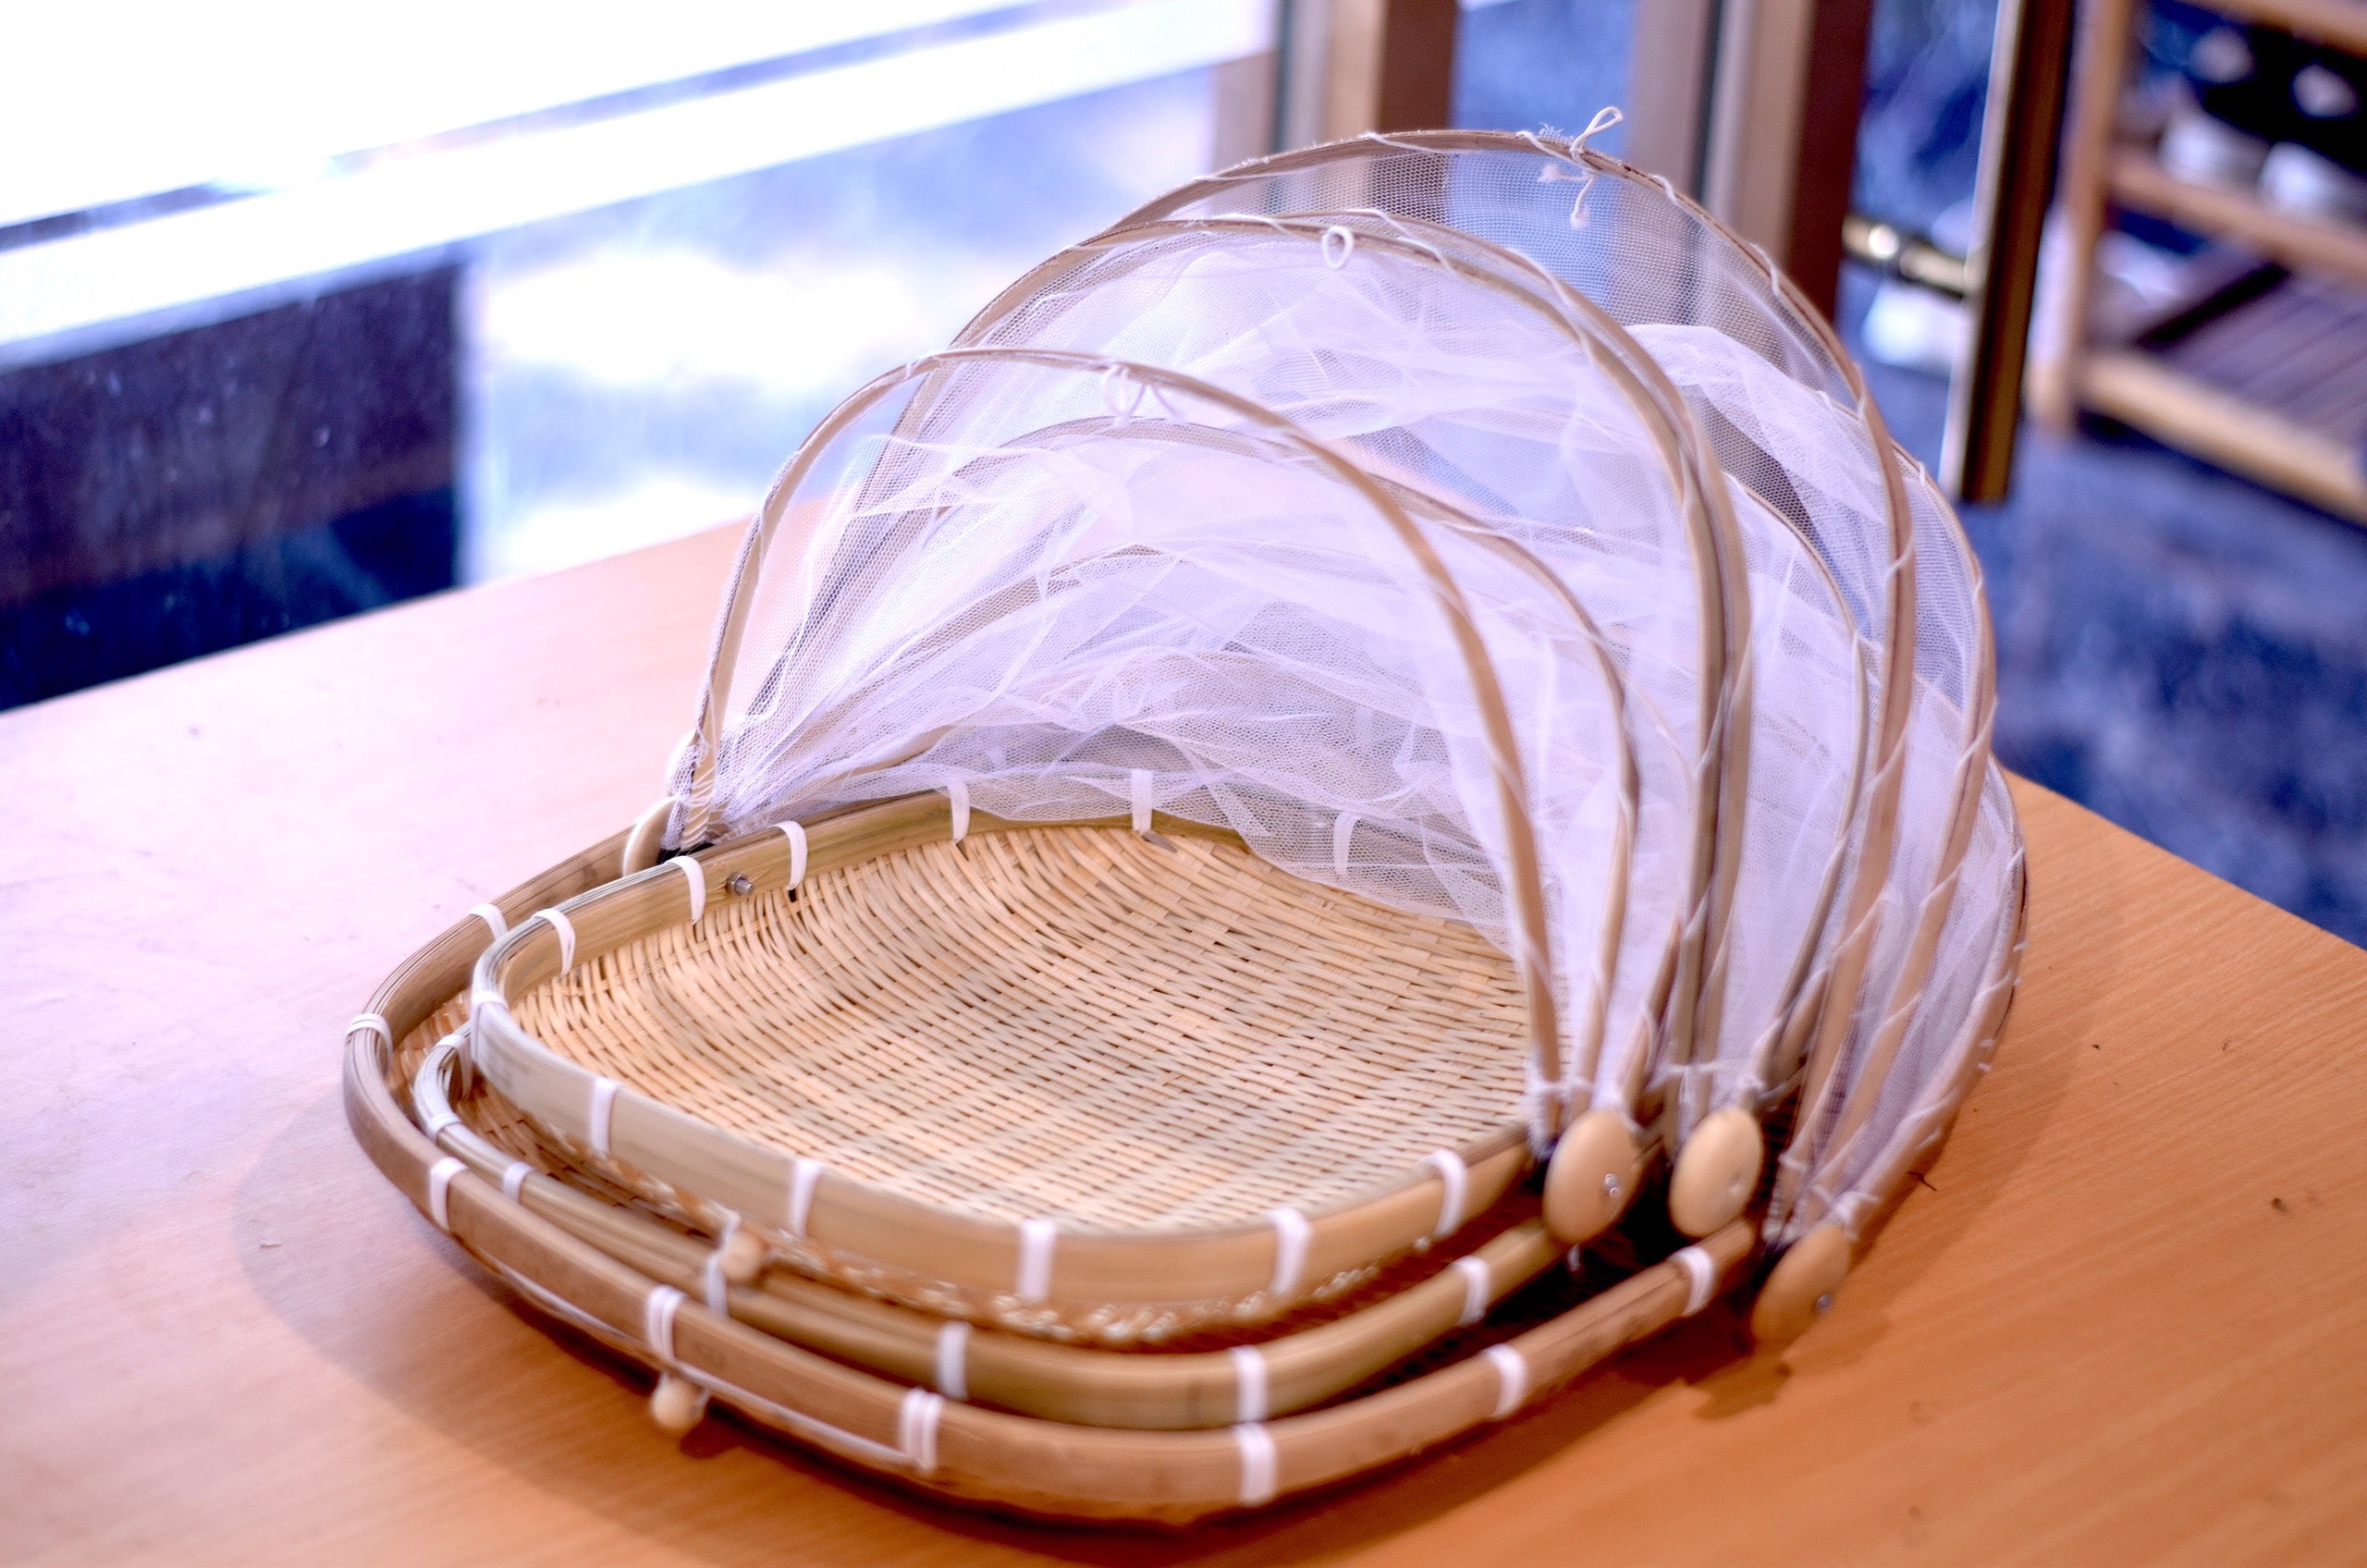 Bamboo Woven Insect-Proof Basket with Mesh Cover Anti-Fly Storage